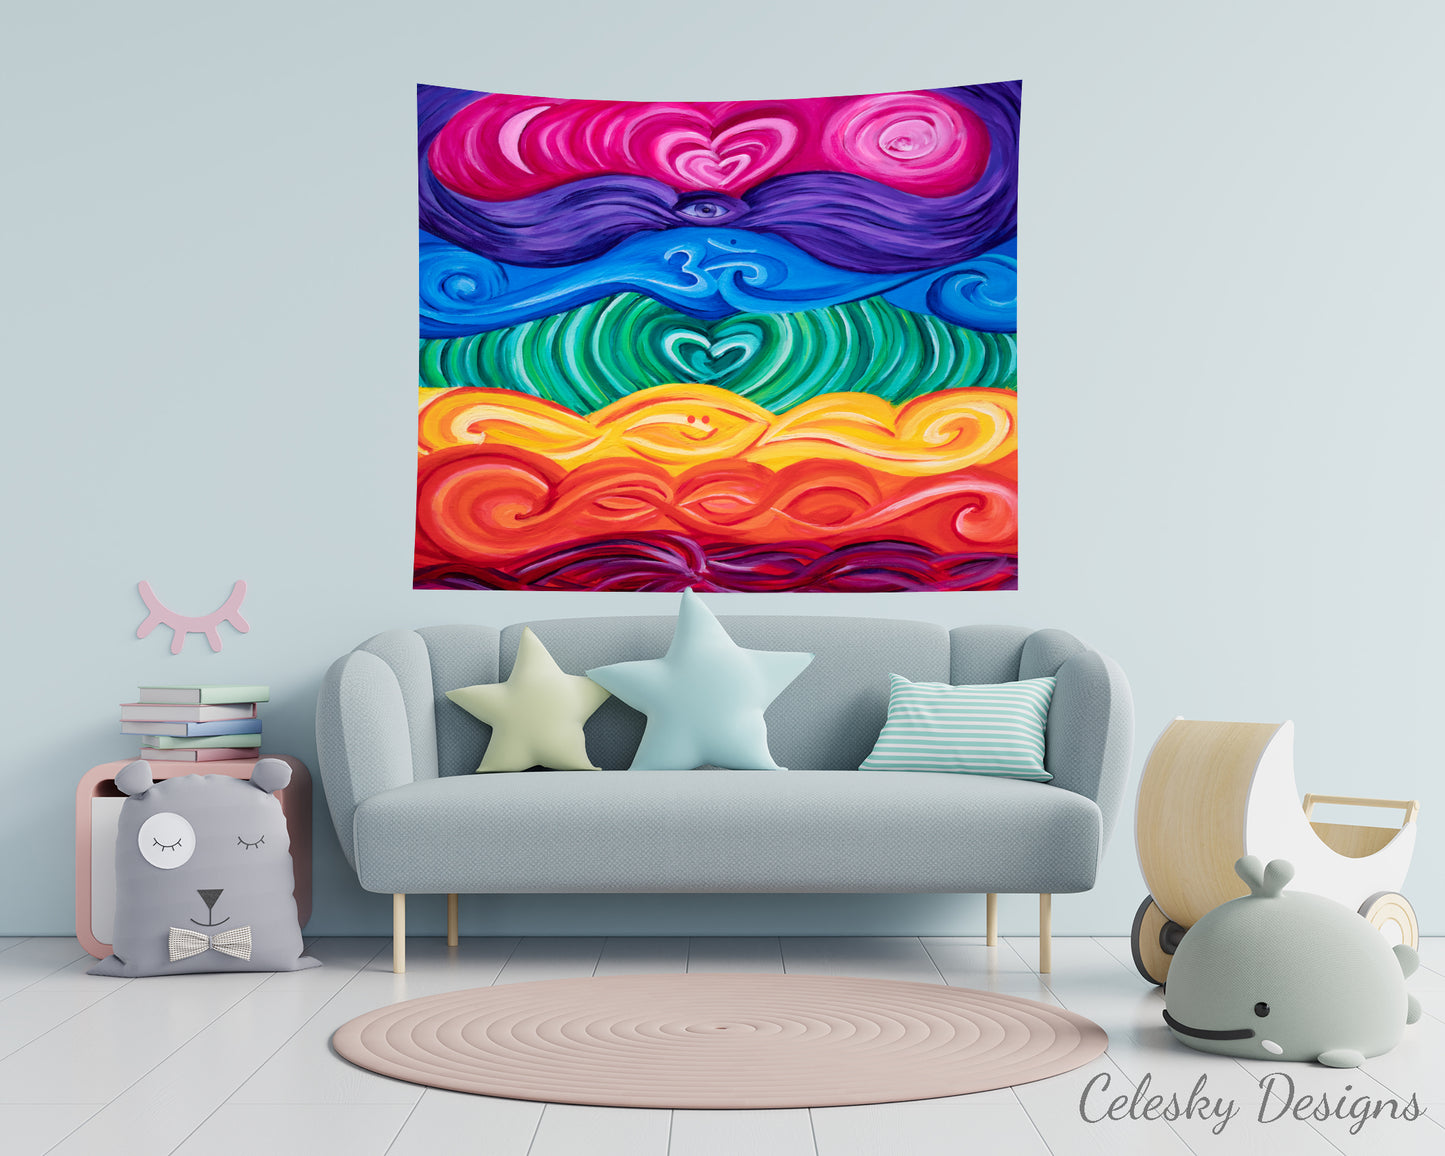 Chakra Tapestry Rainbow Tapestry Gay Spiritual Tapestries Yoga Tapestries Chakras Tapestry Artsy Unique Colorful Tapestry